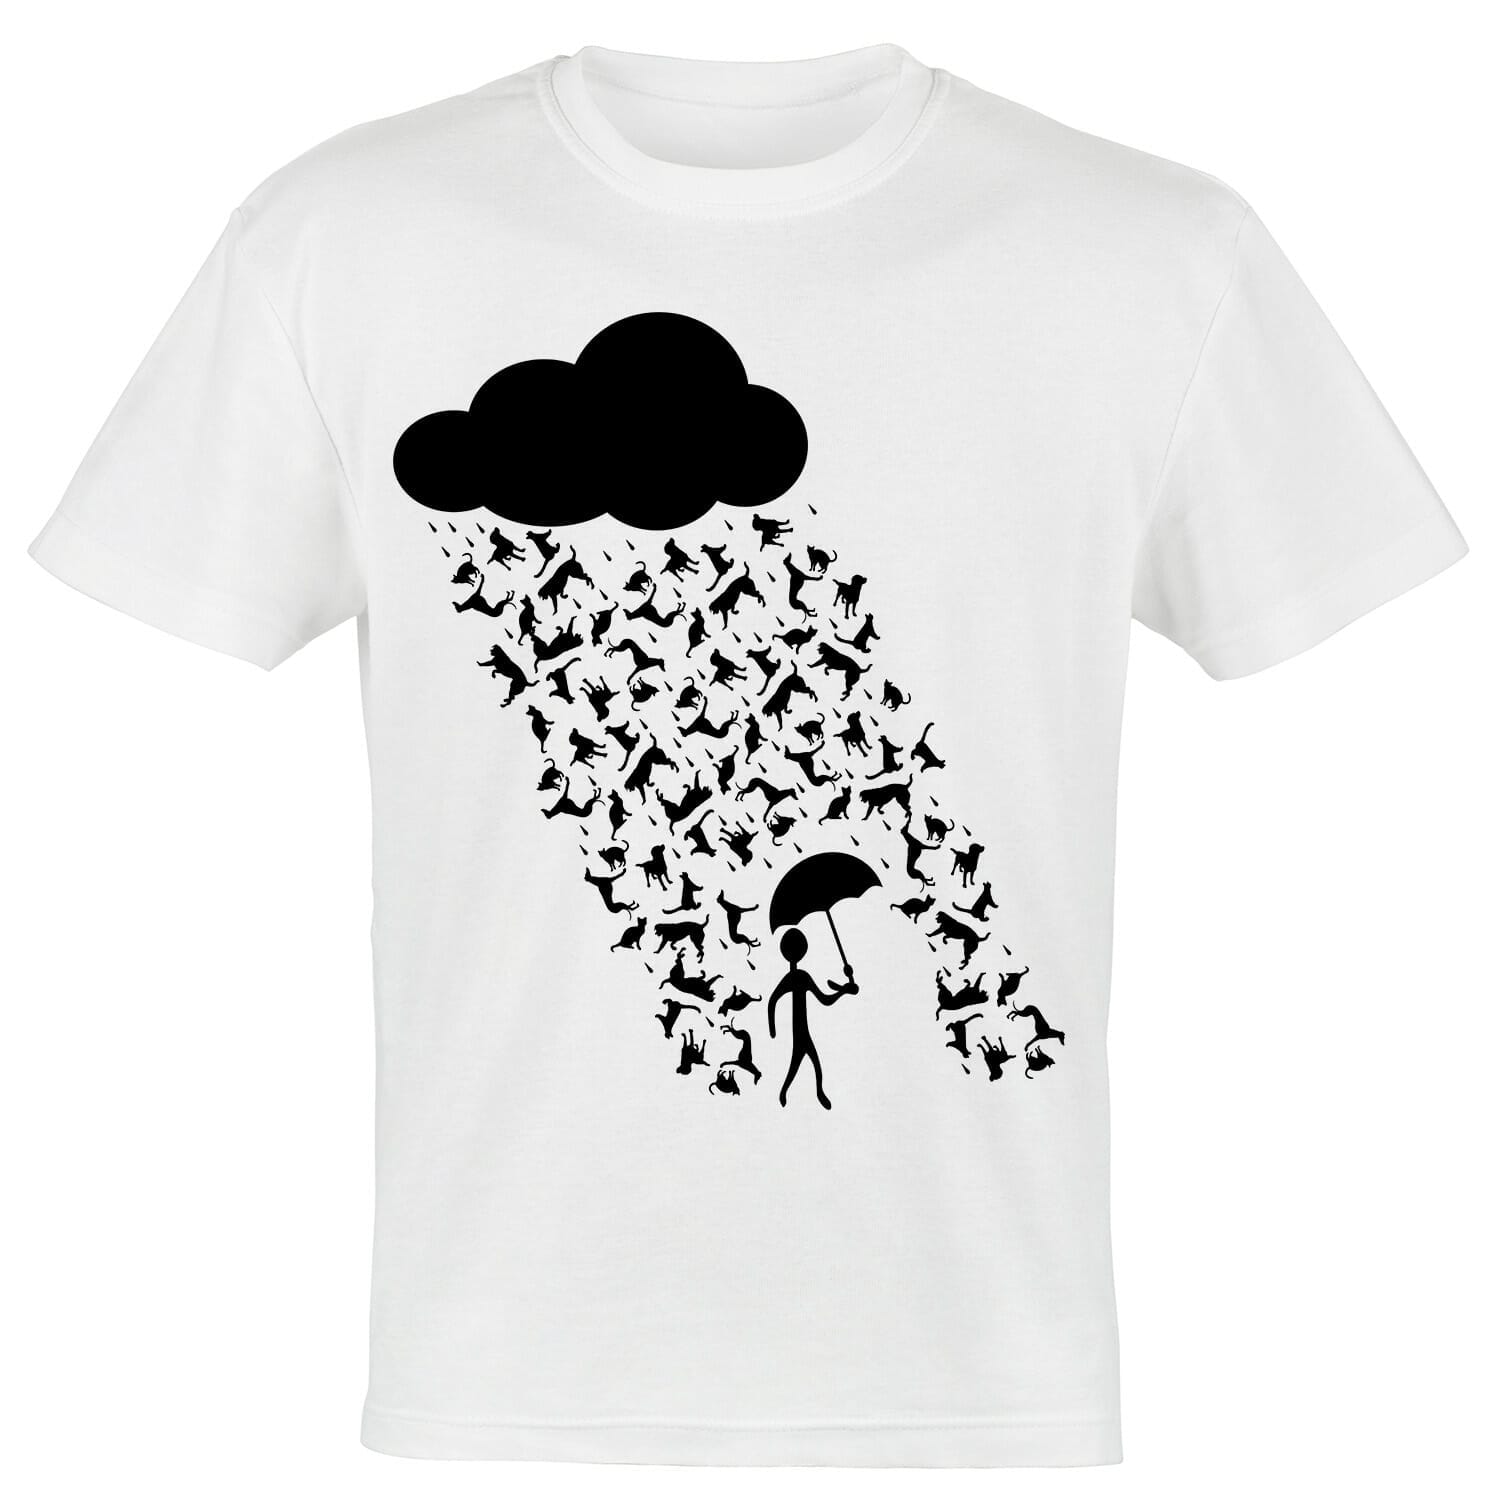 cats and dogs raining down tshirt design